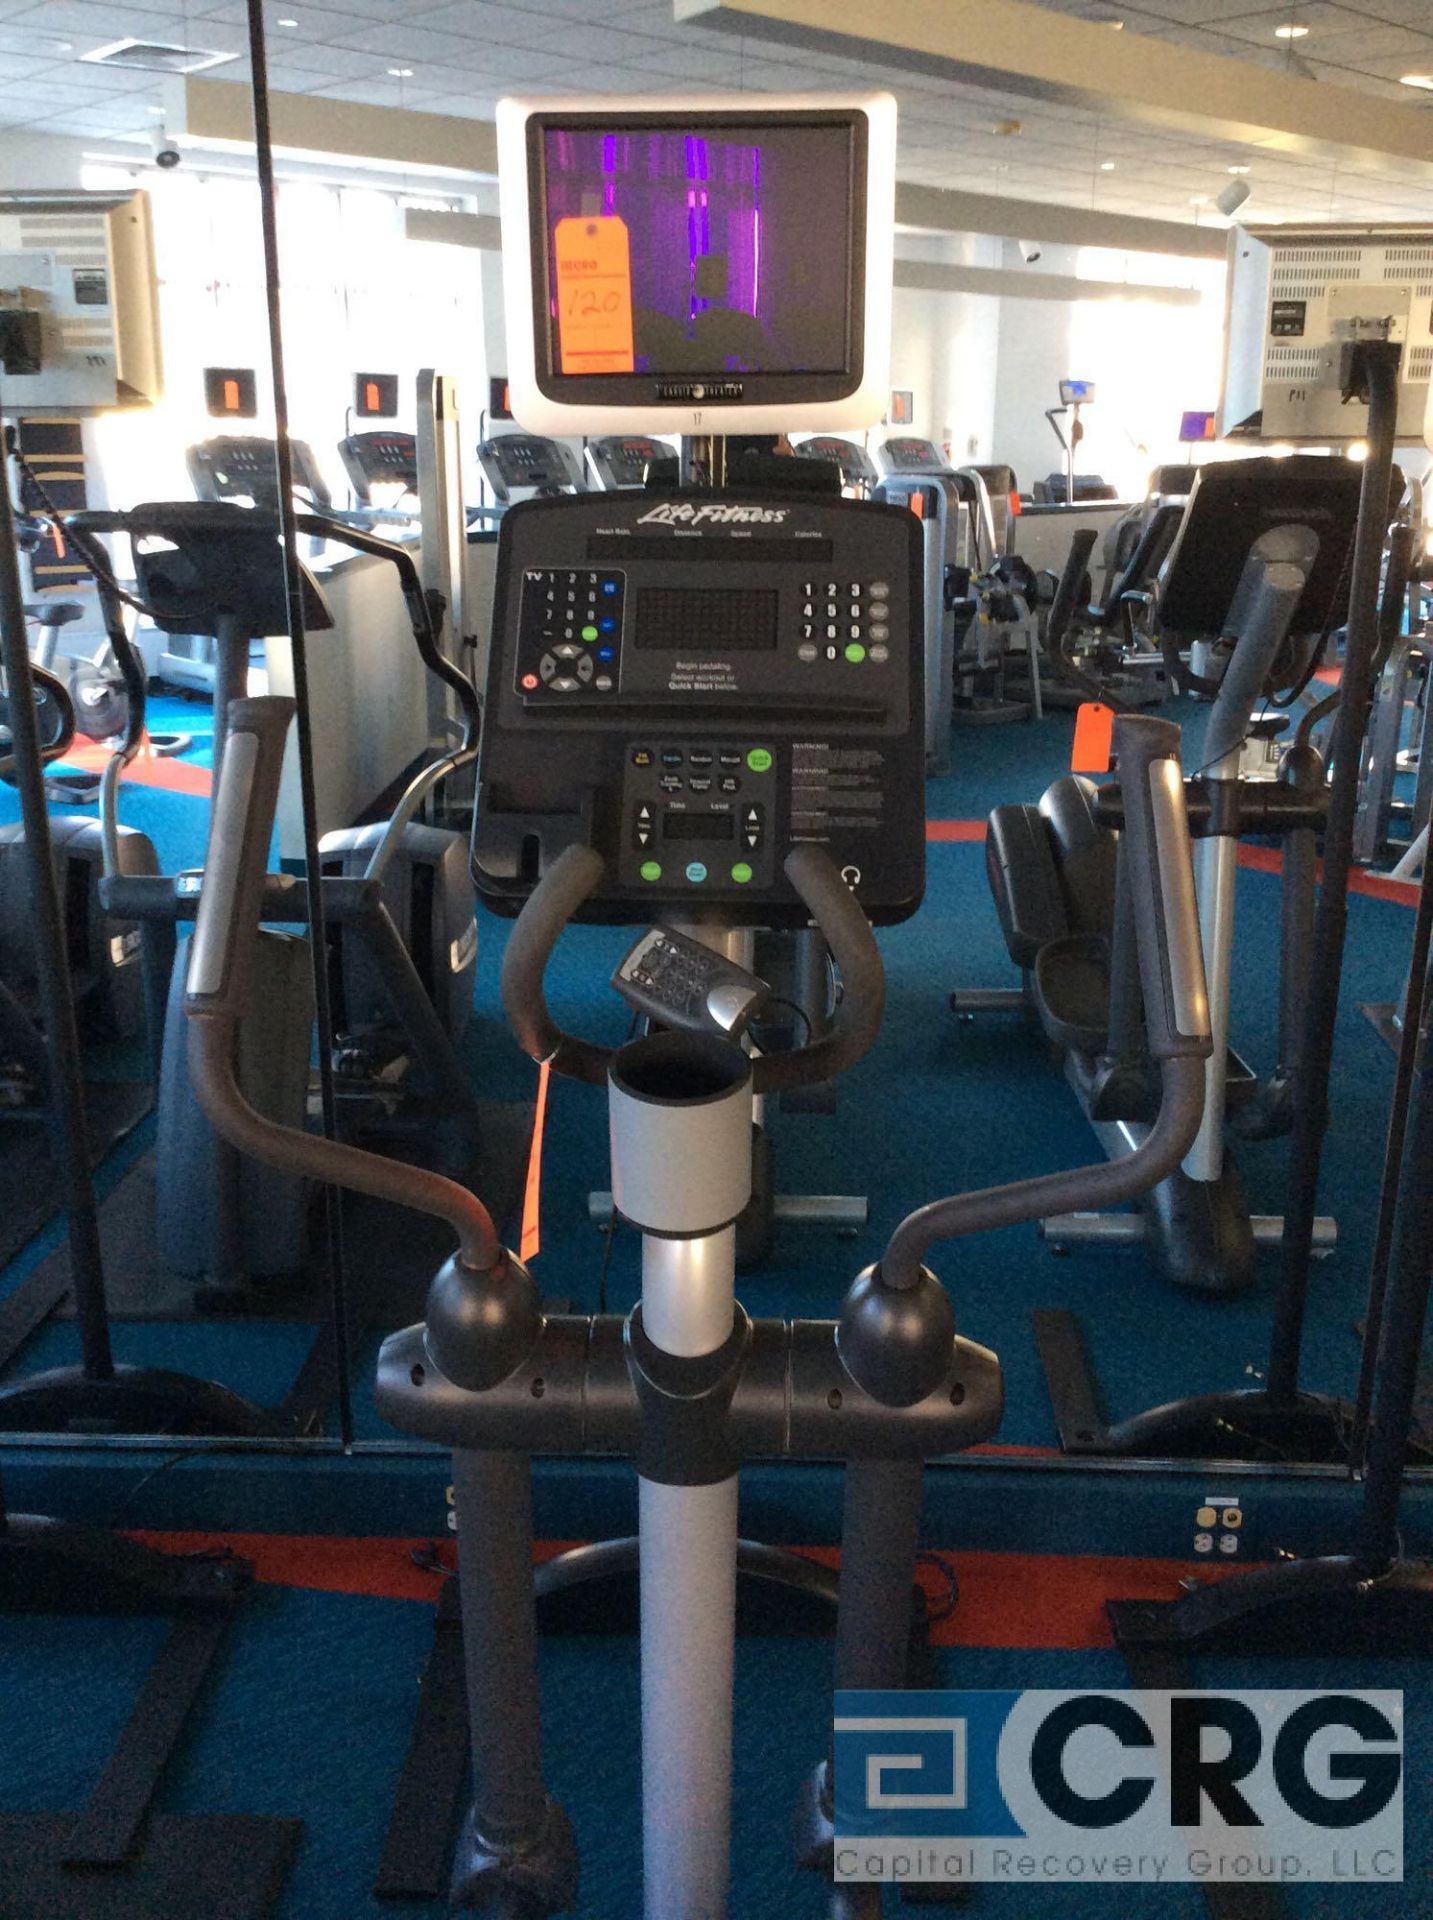 Life-Fitness CLSX Elliptical Machine with Cardio Theater Monitor, s/n CXX145167 - Image 3 of 3